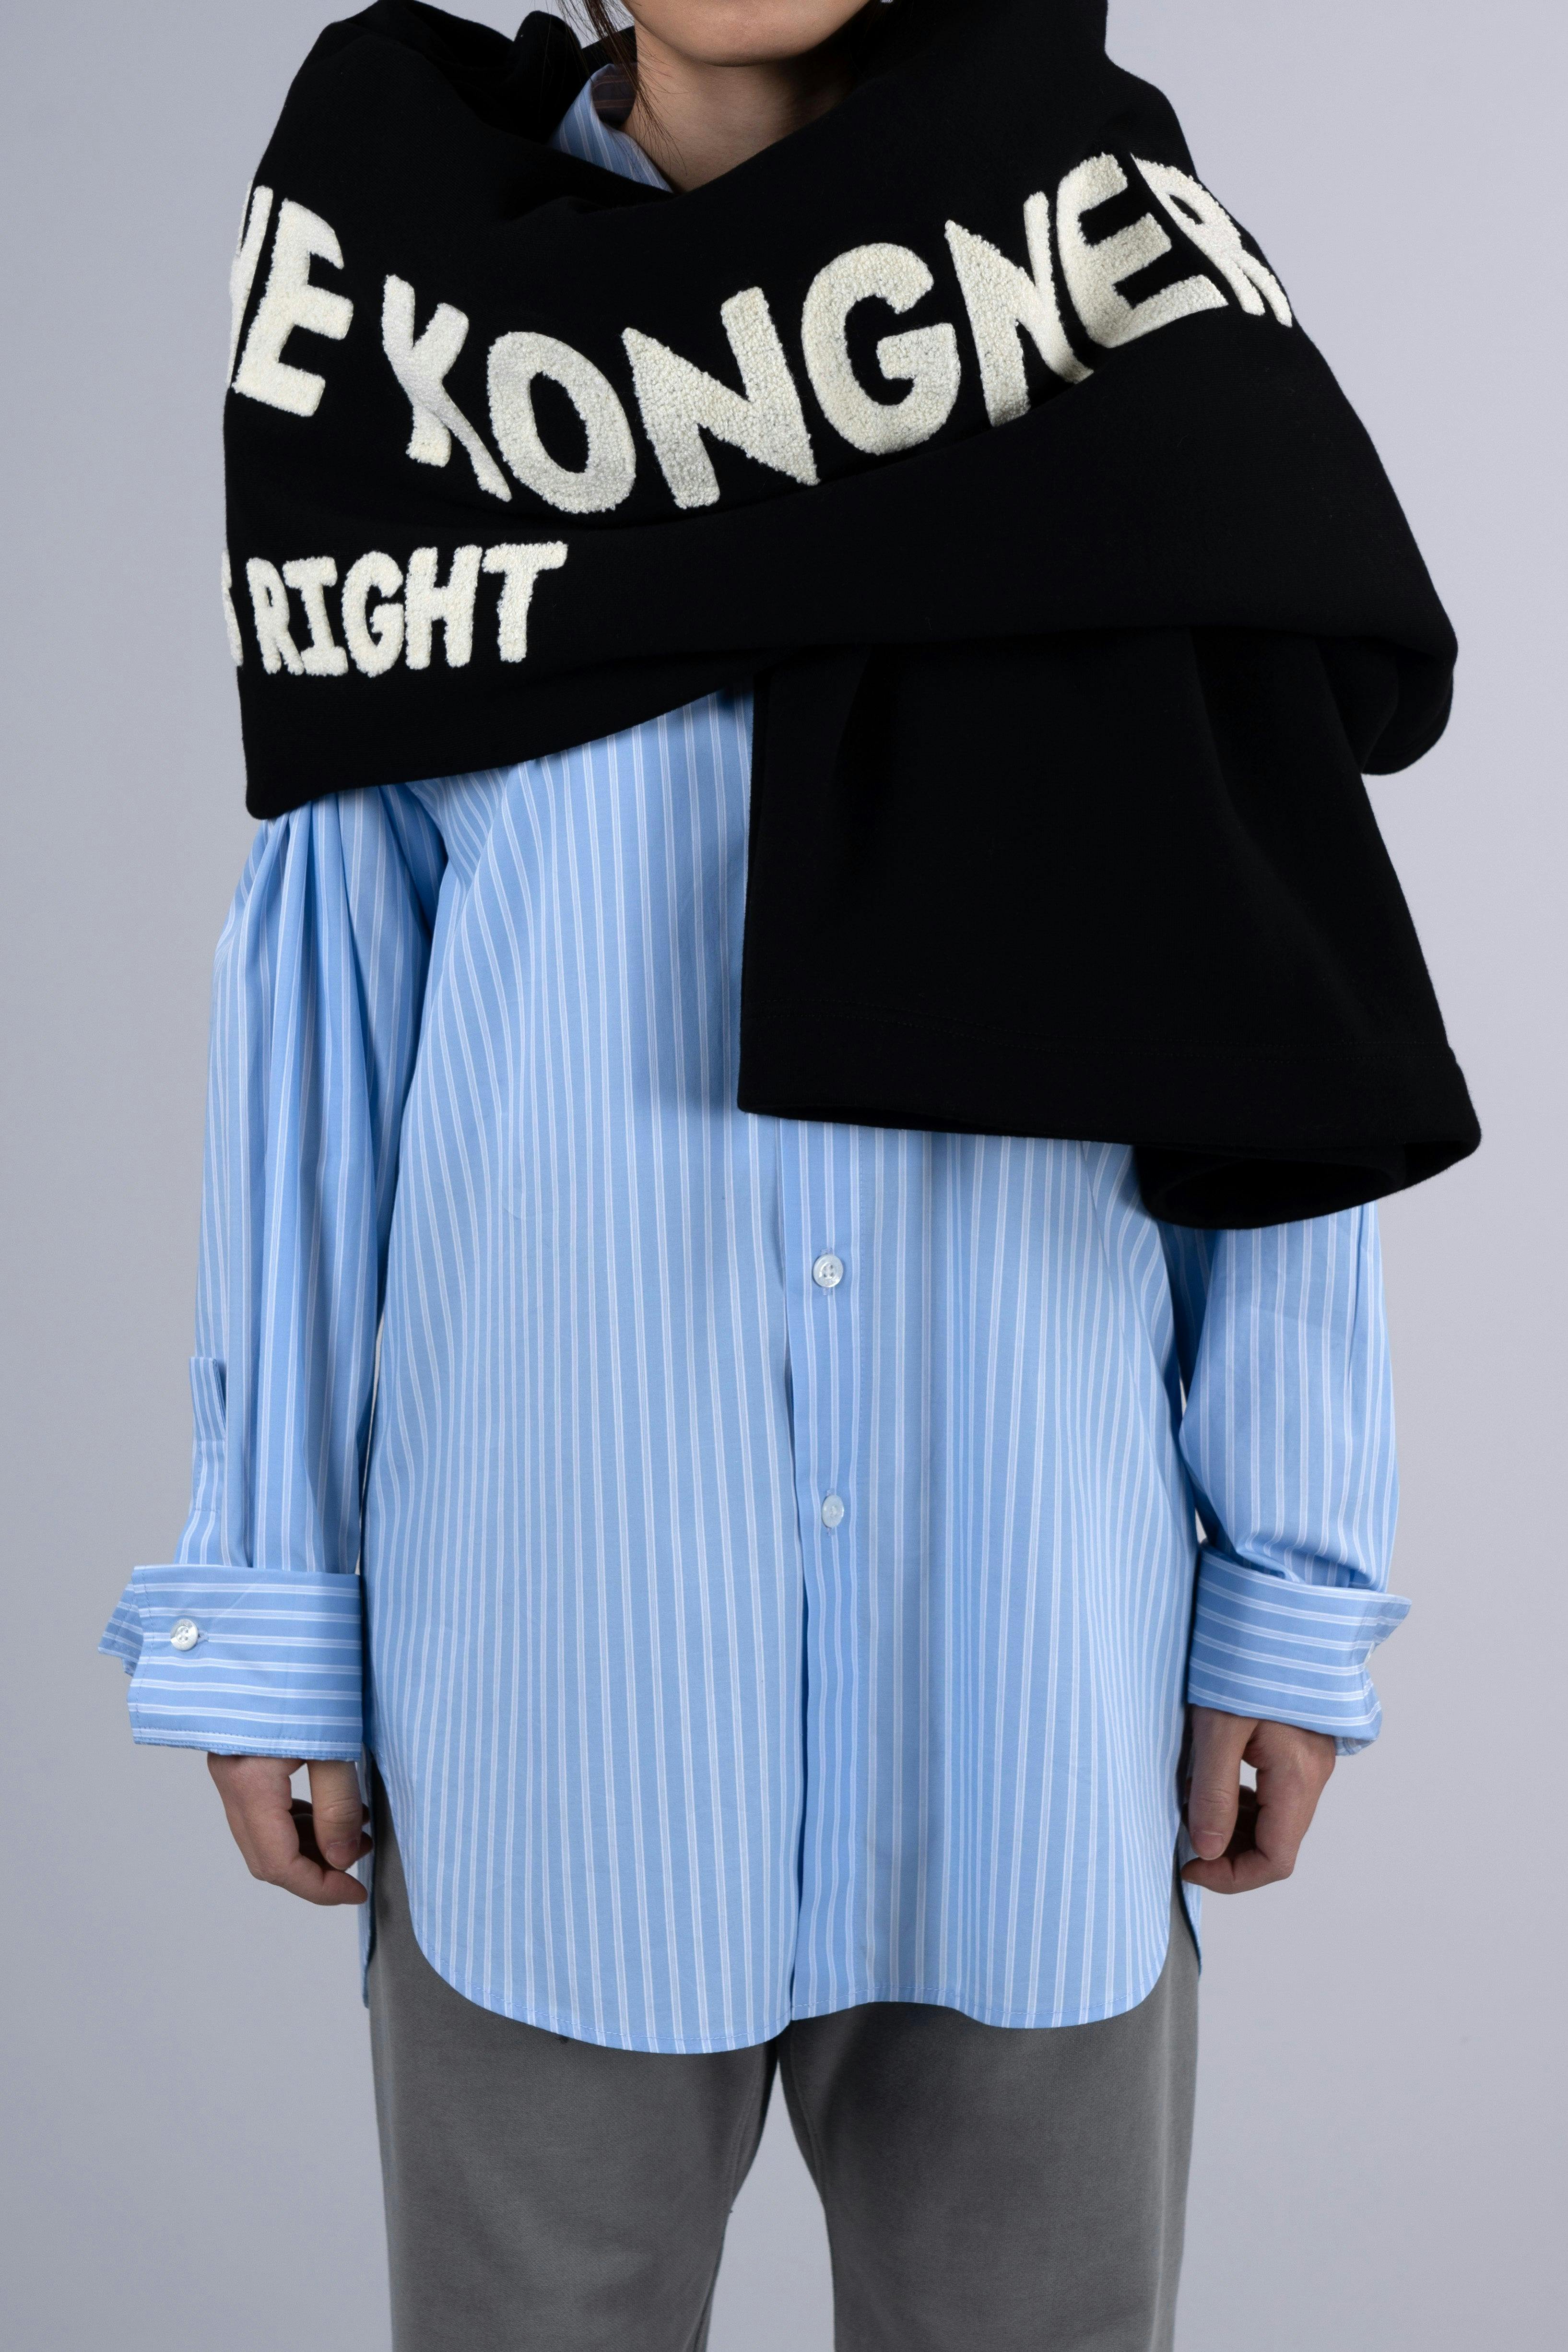 ˝SET THINGS RIGHT˝ Cotton Blanket - Black